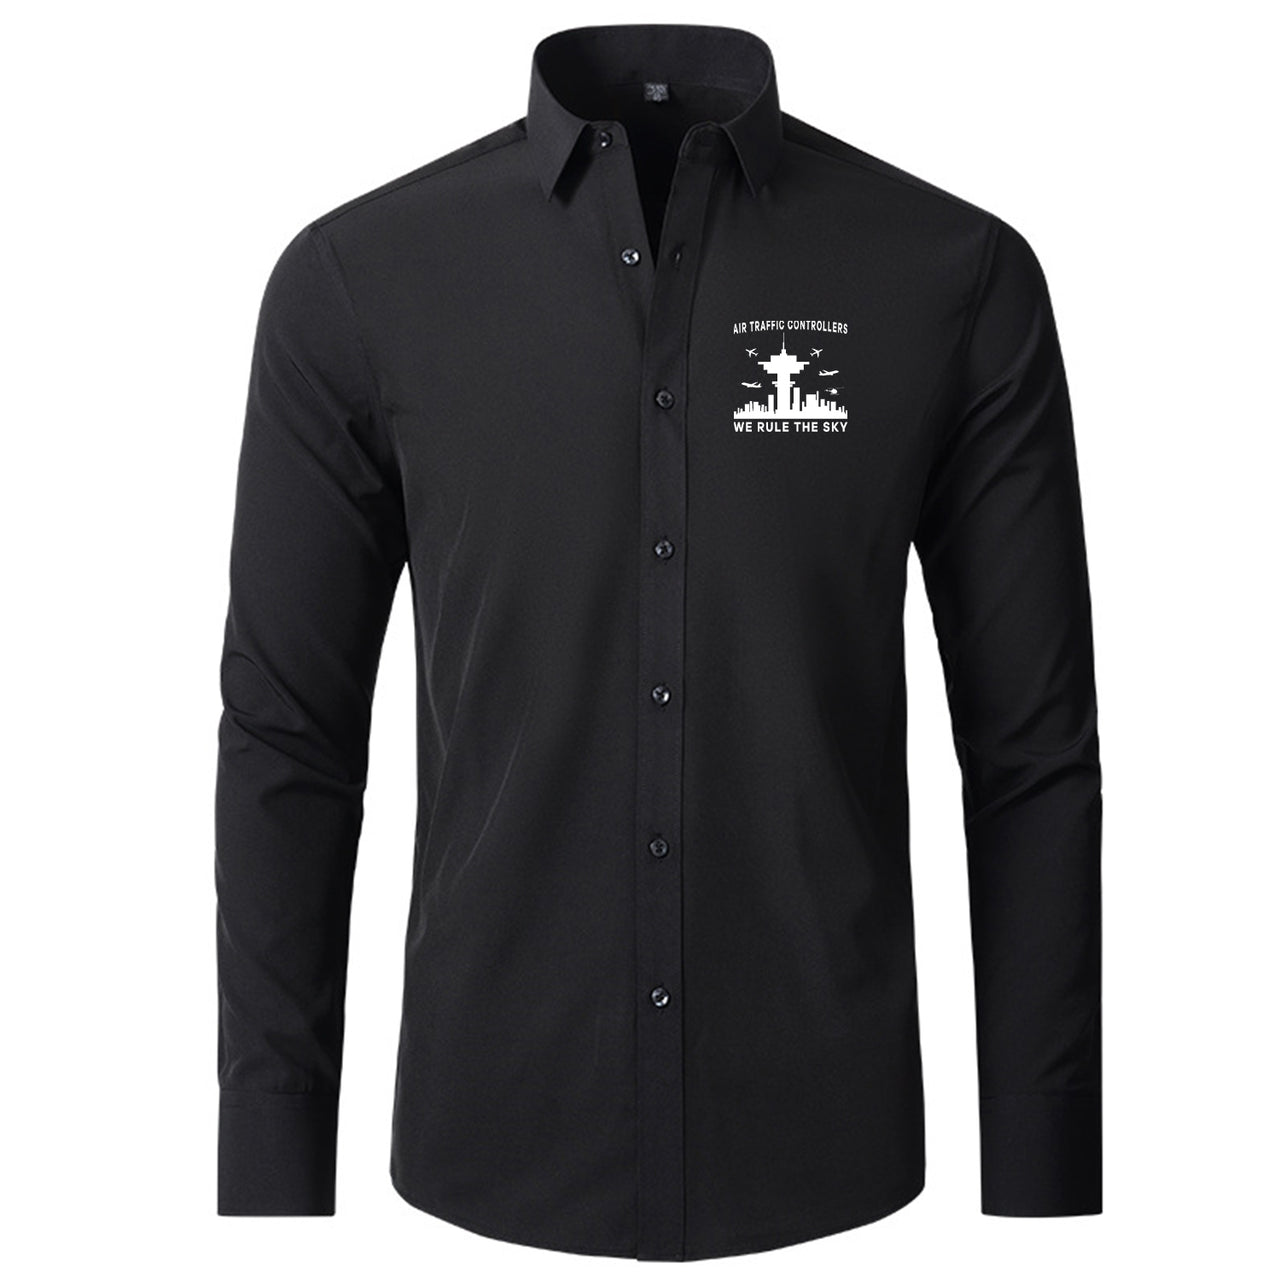 Air Traffic Controllers - We Rule The Sky Designed Long Sleeve Shirts